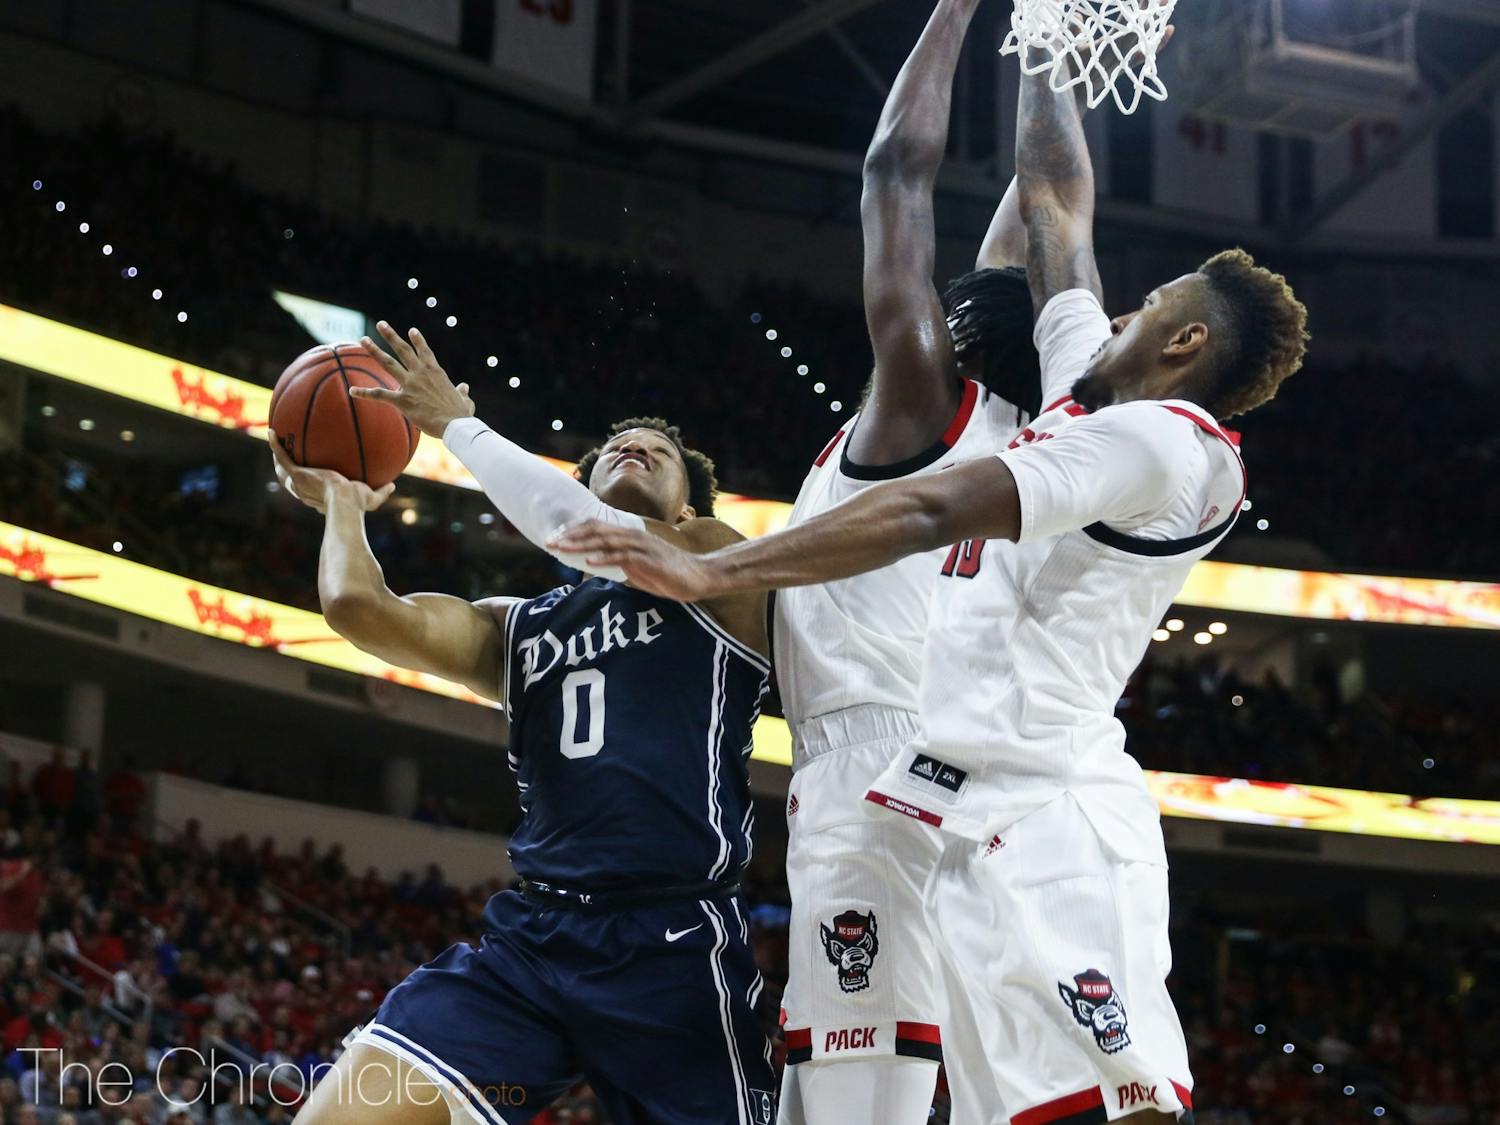 Duke's men's basketball team lost to N.C. State at PNC Arena on Feb. 19.